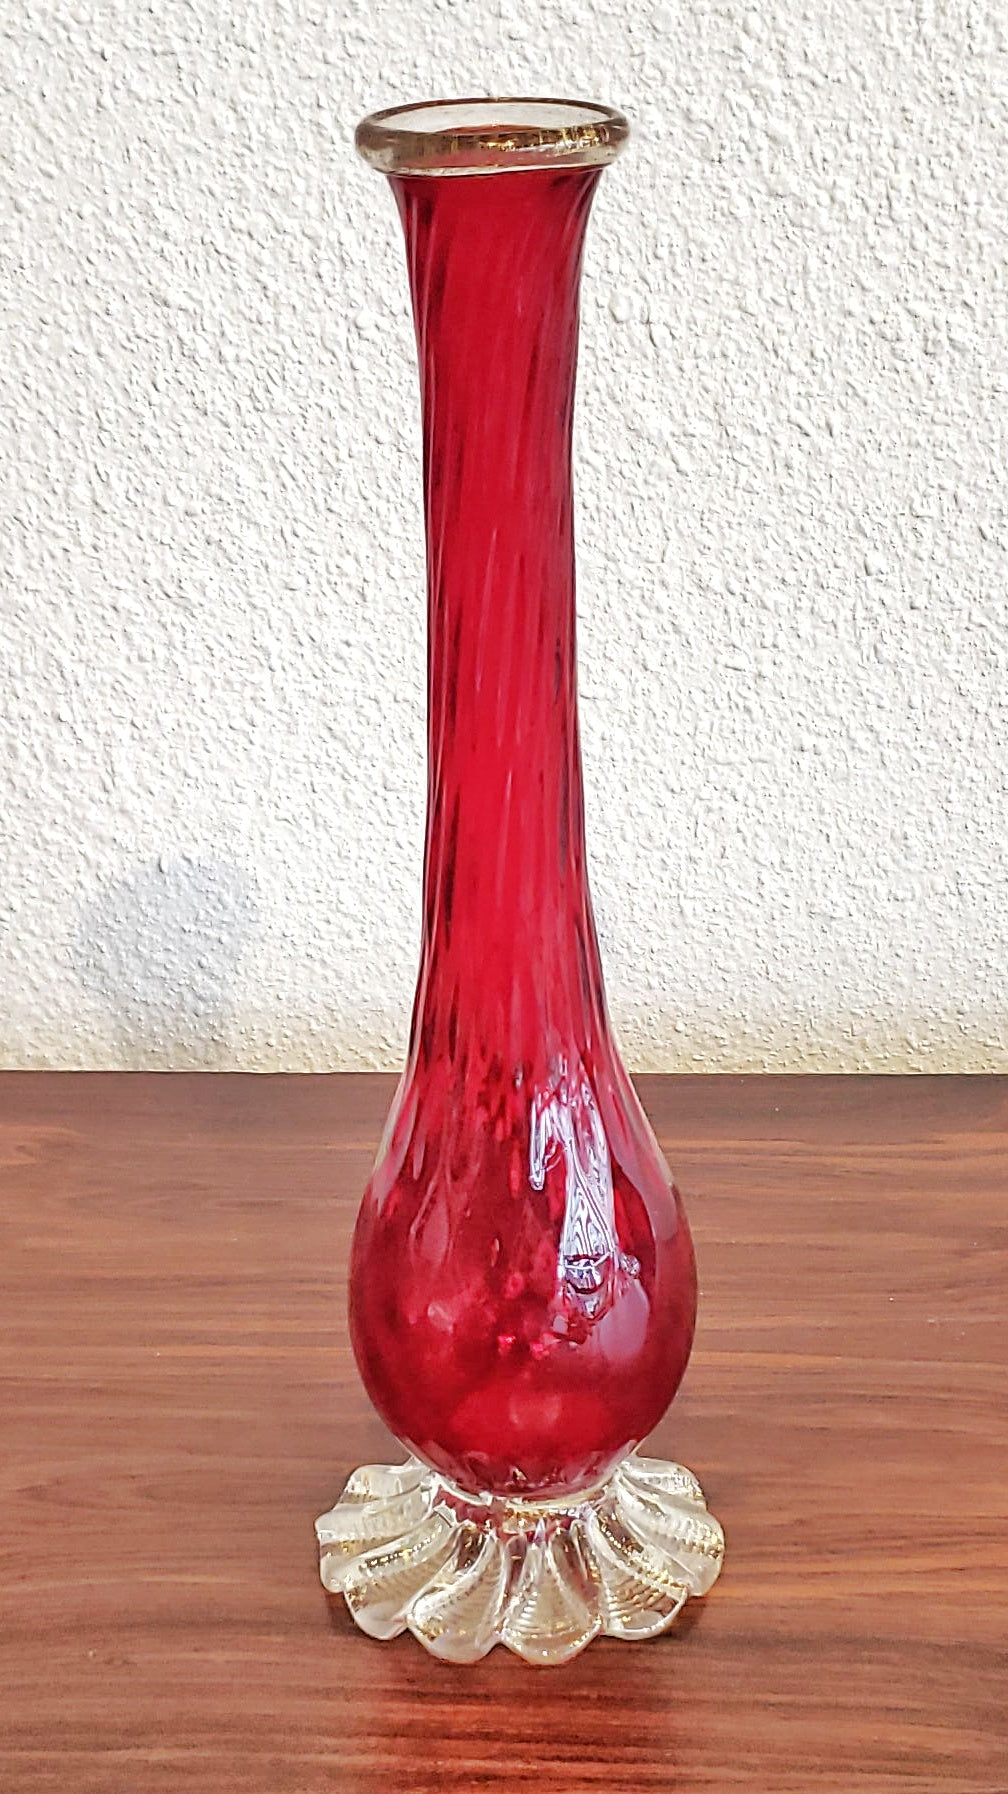 Murano Glass Vase – Spicer and Wood